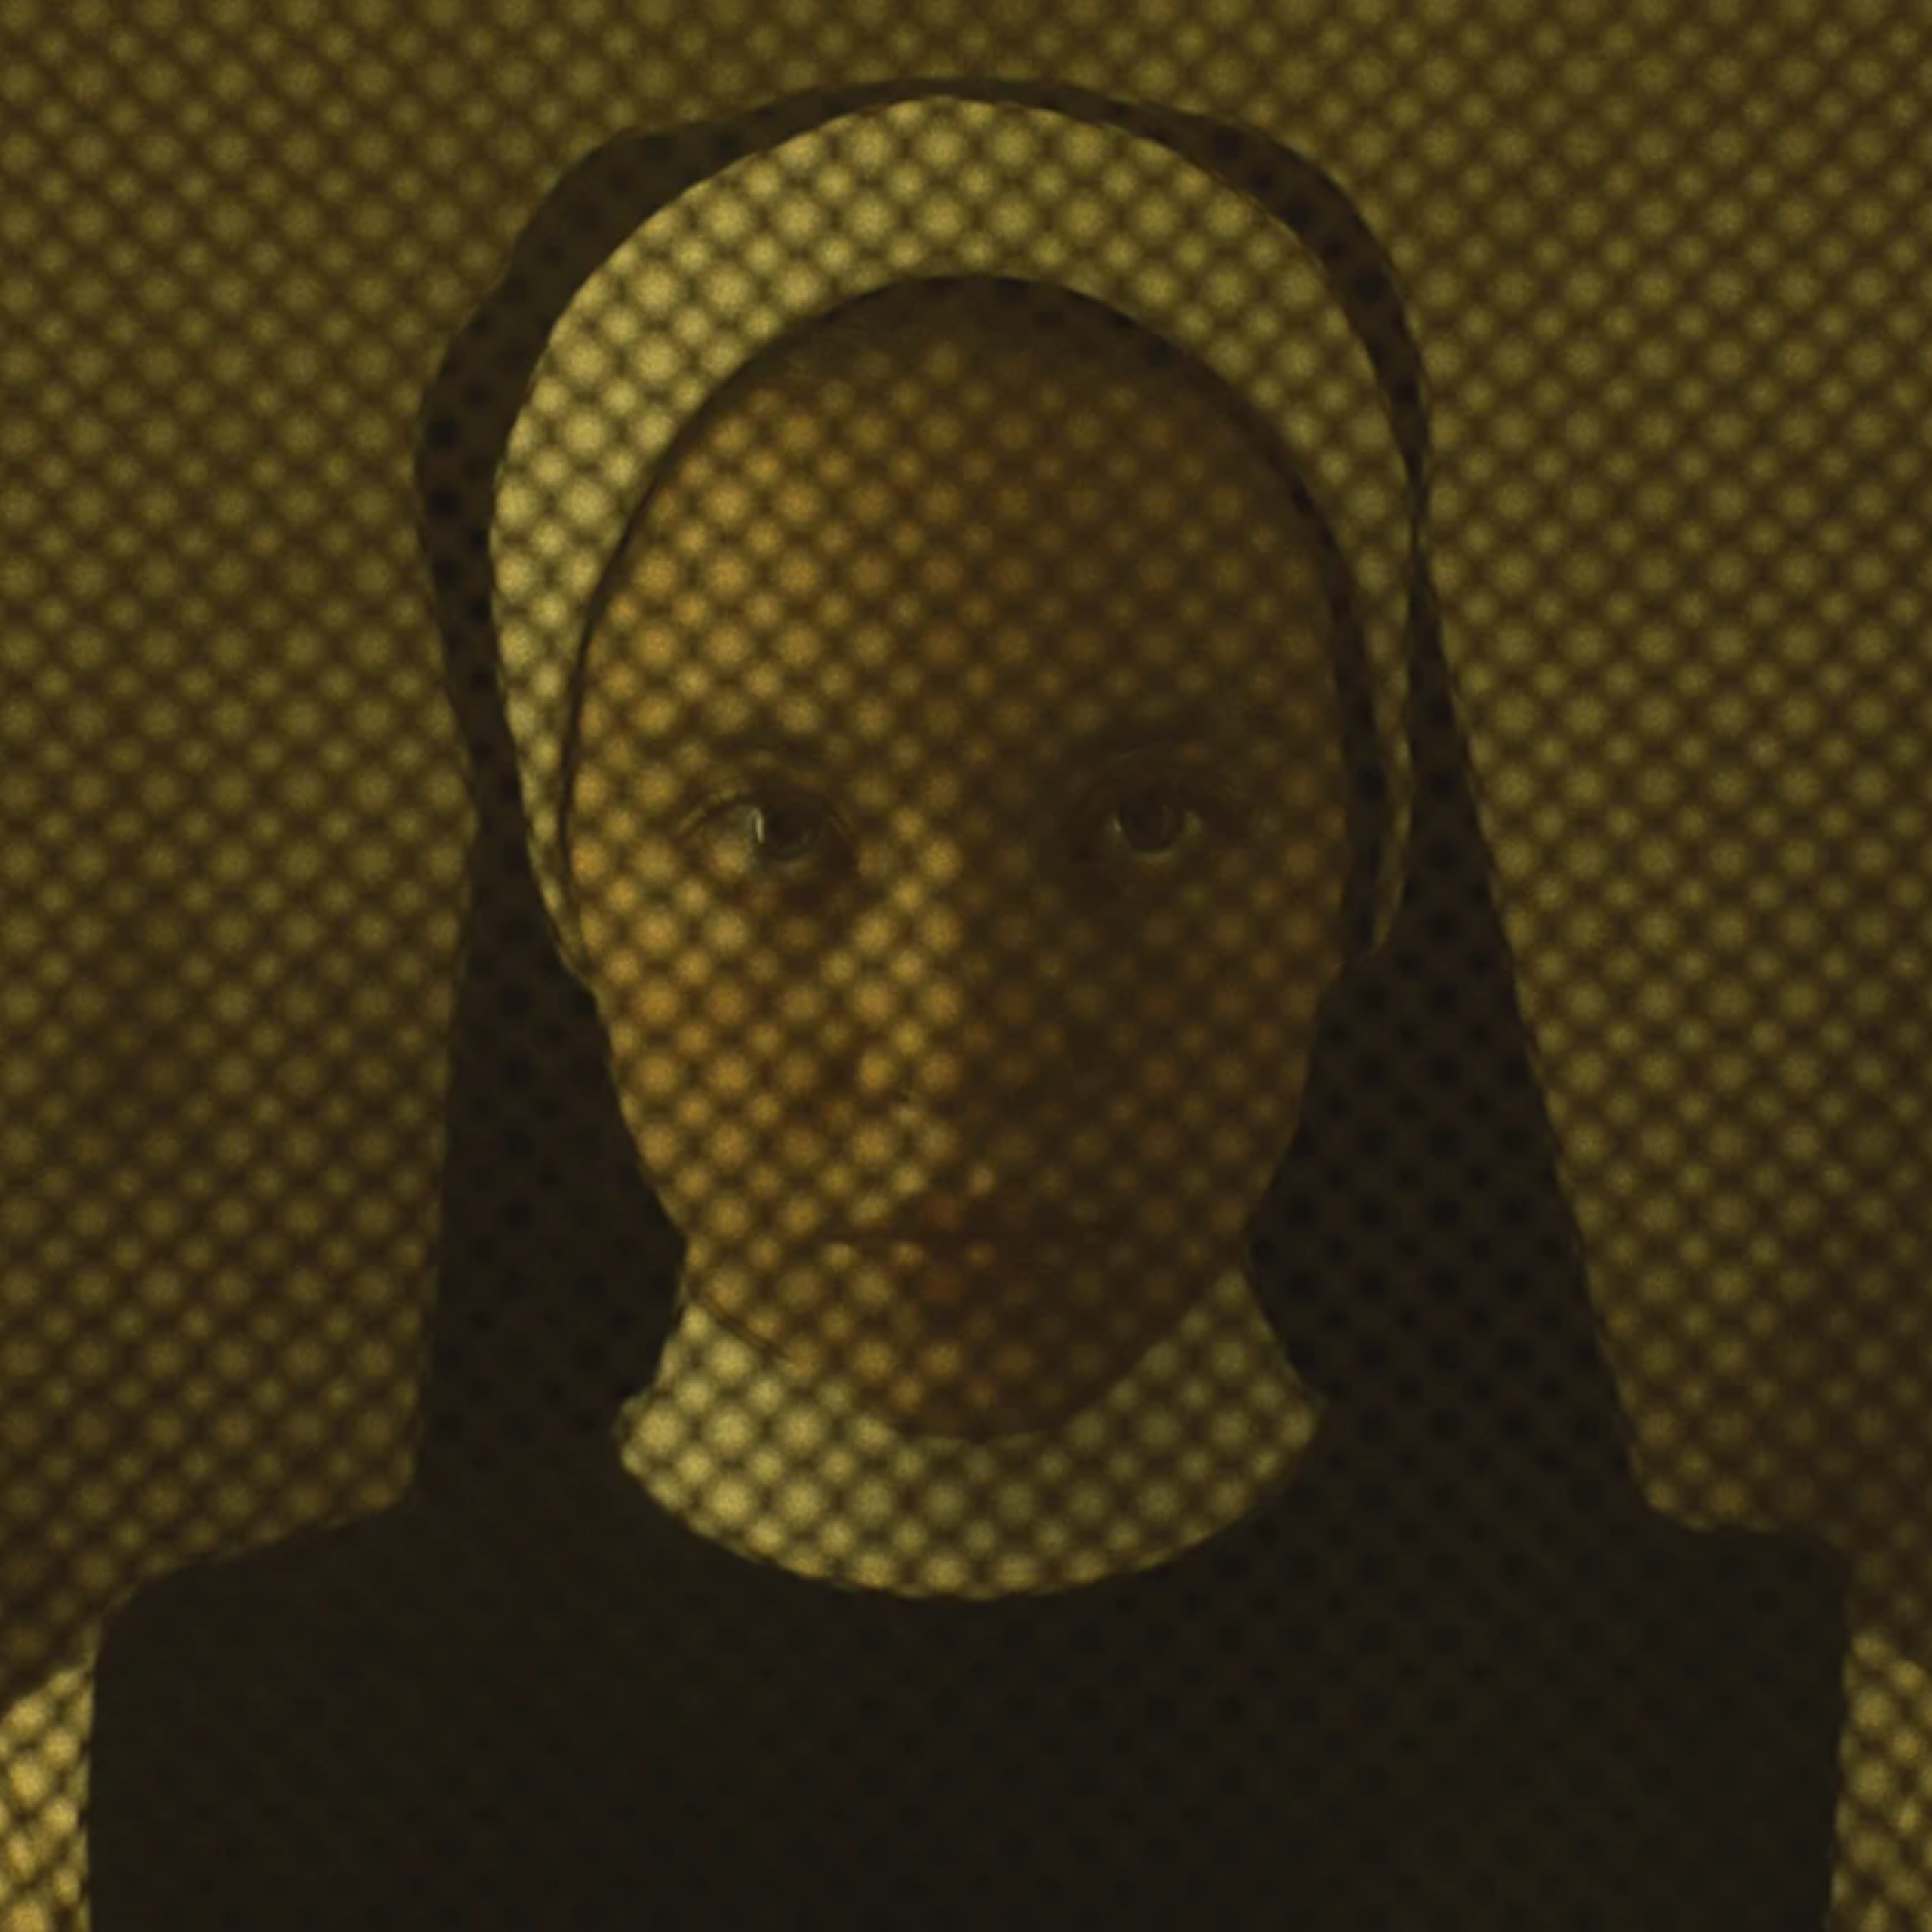 A young woman dressed as a nun staring at the camera.